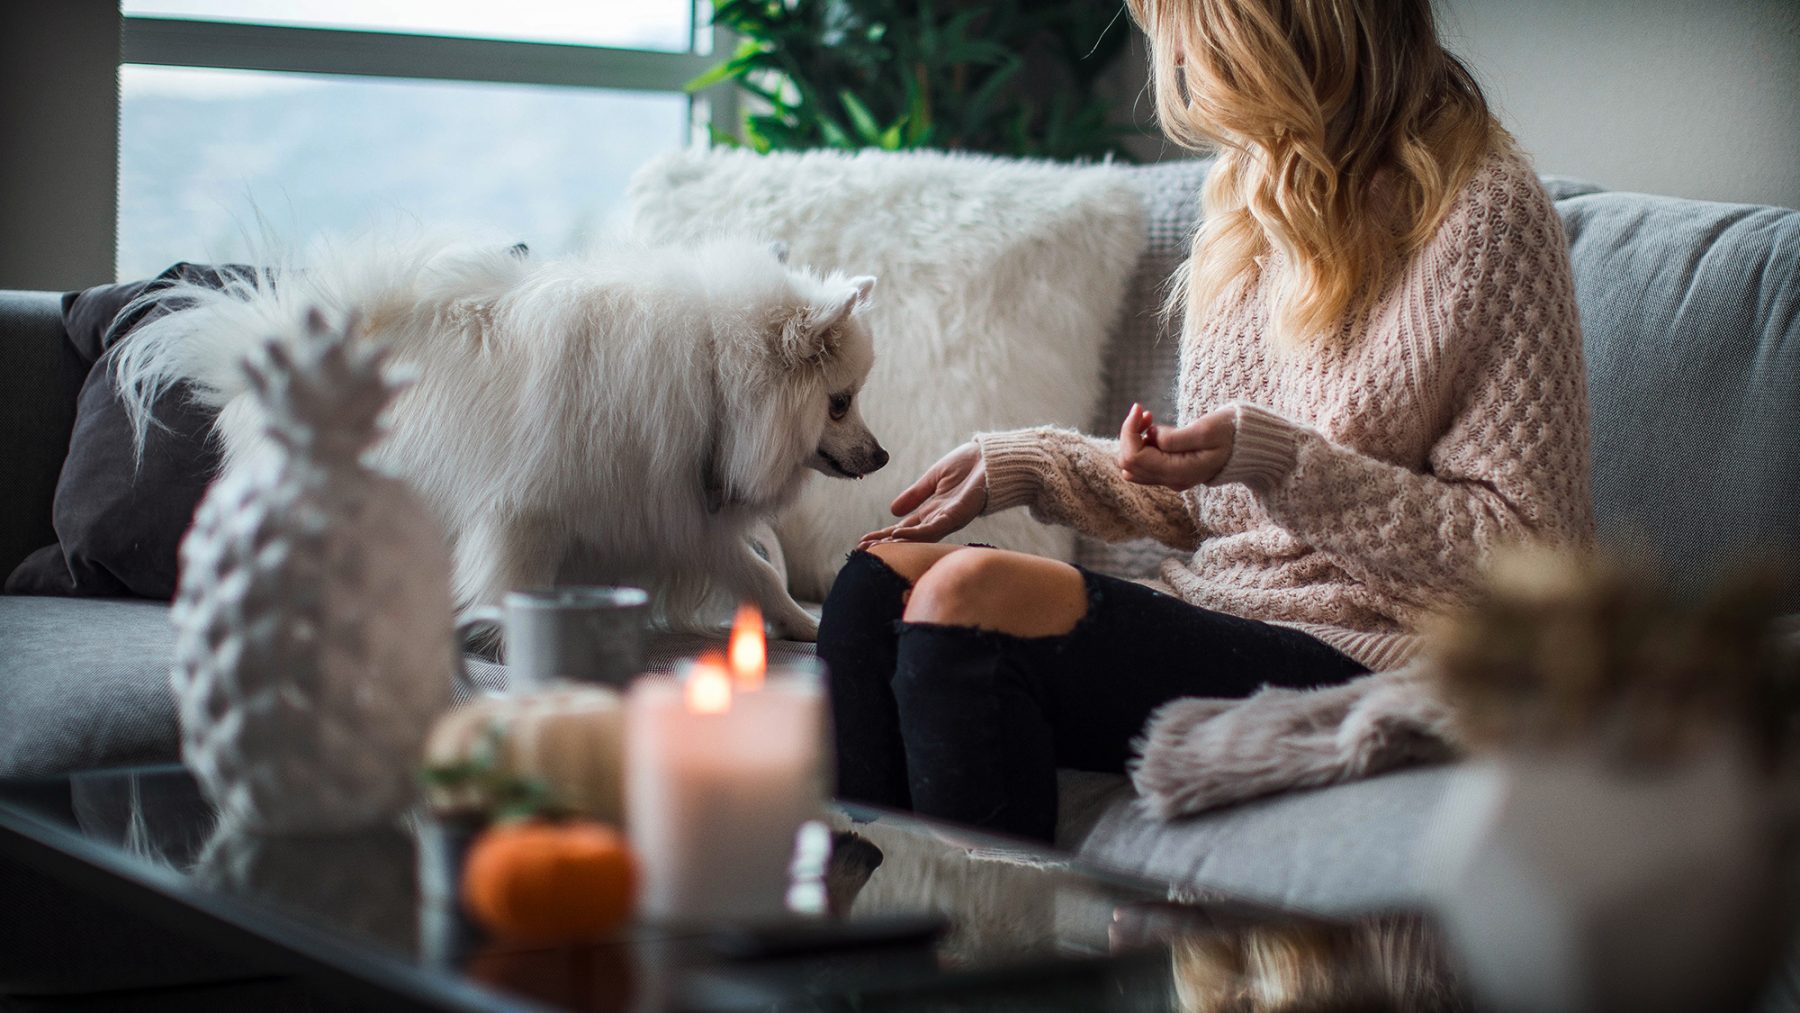 Pet owner keeps their dog safe from harm while a scented candle burns nearby.